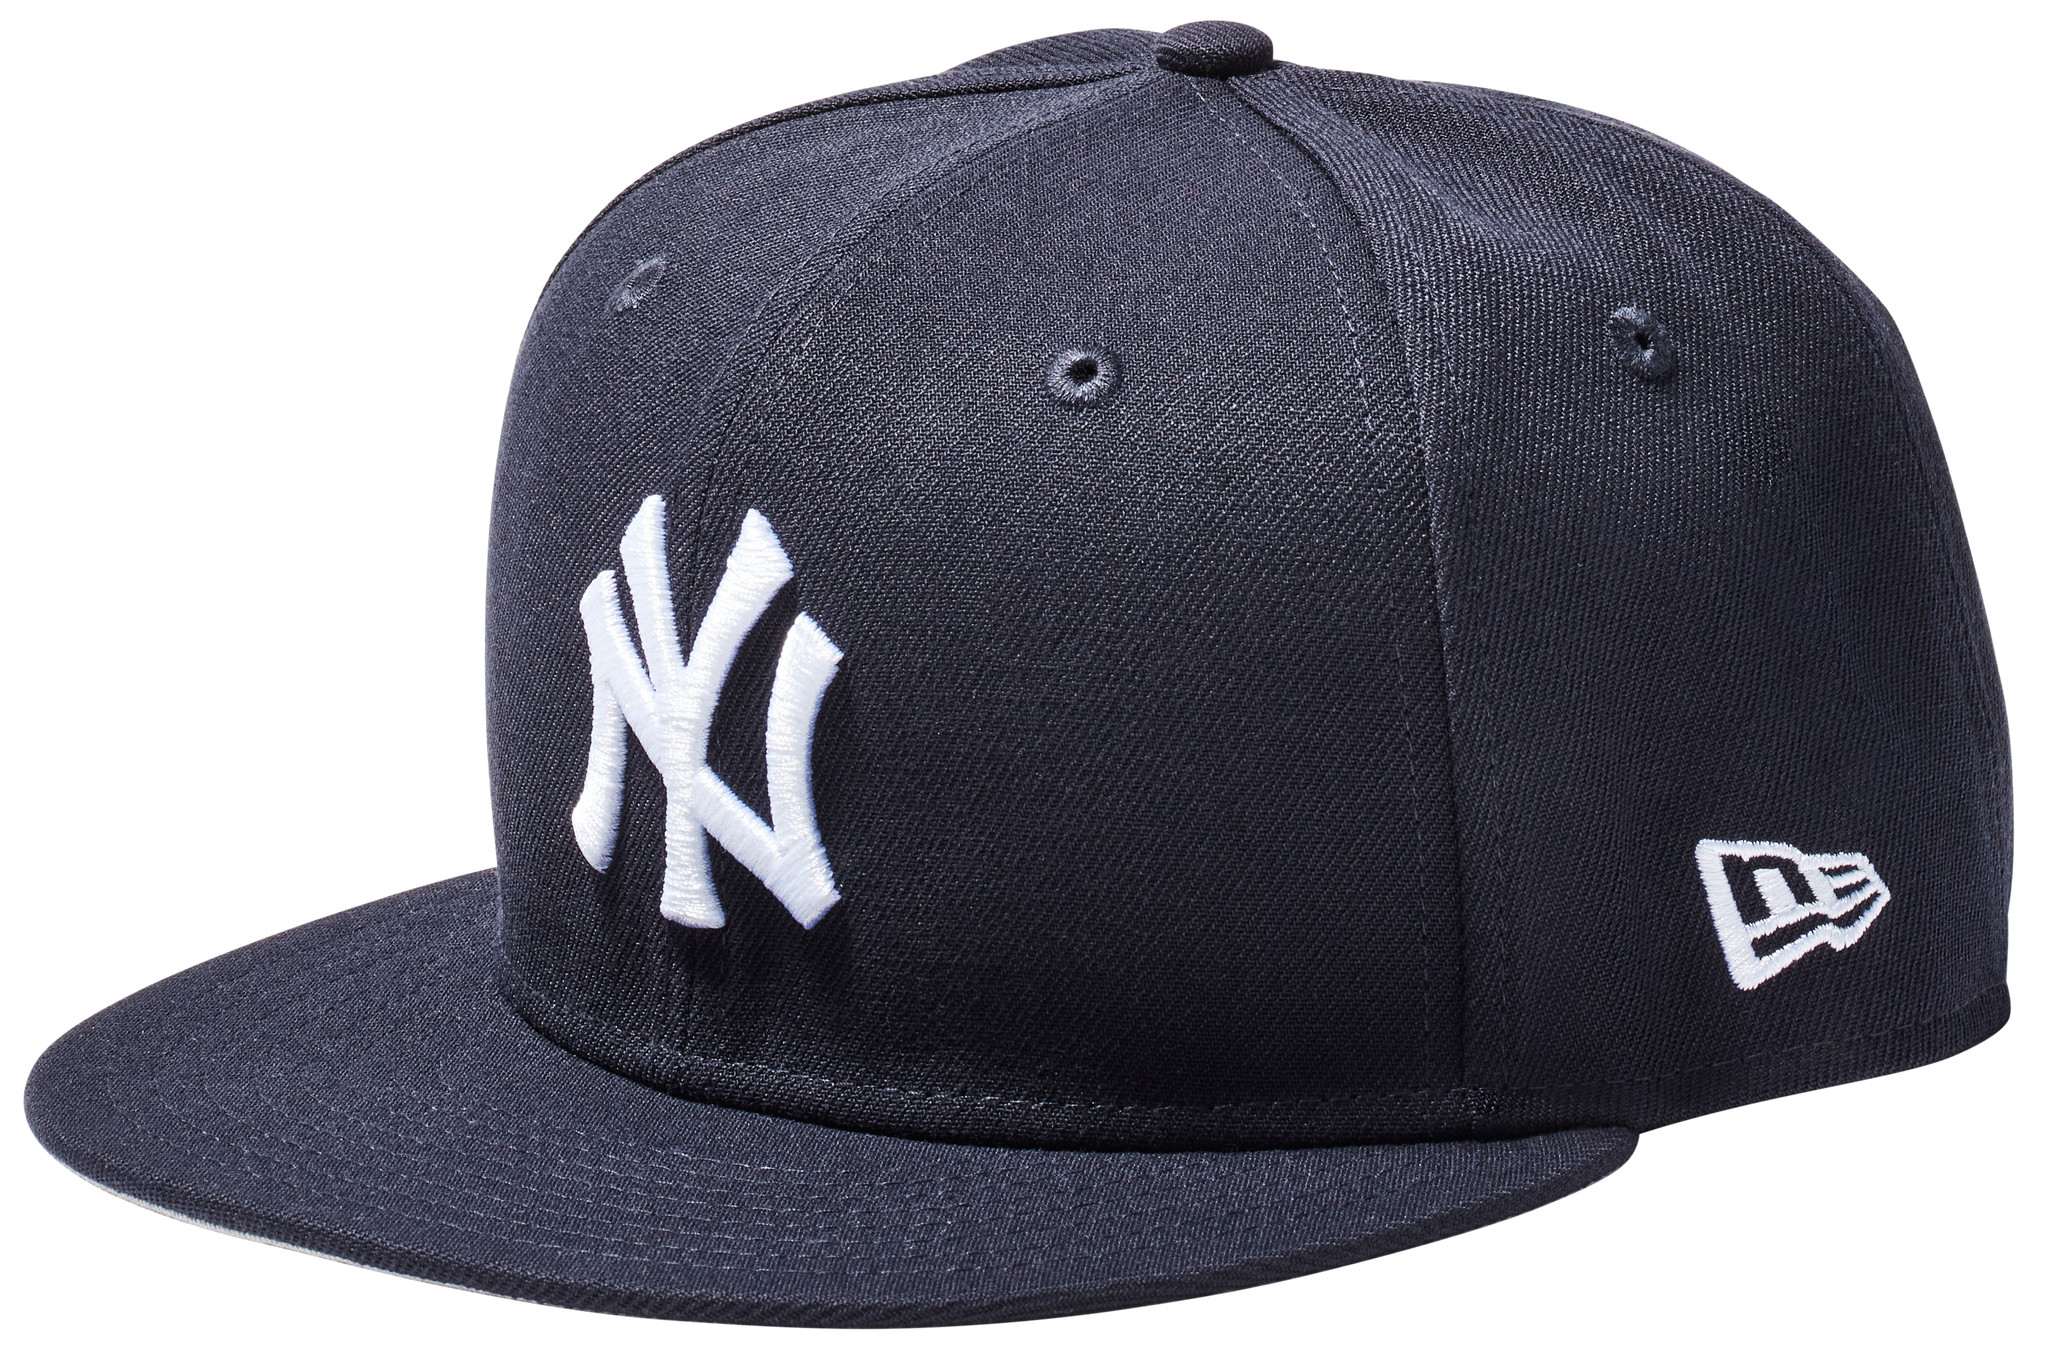 I made the Yankee hat more famous then a Yankee can” - Jay Z